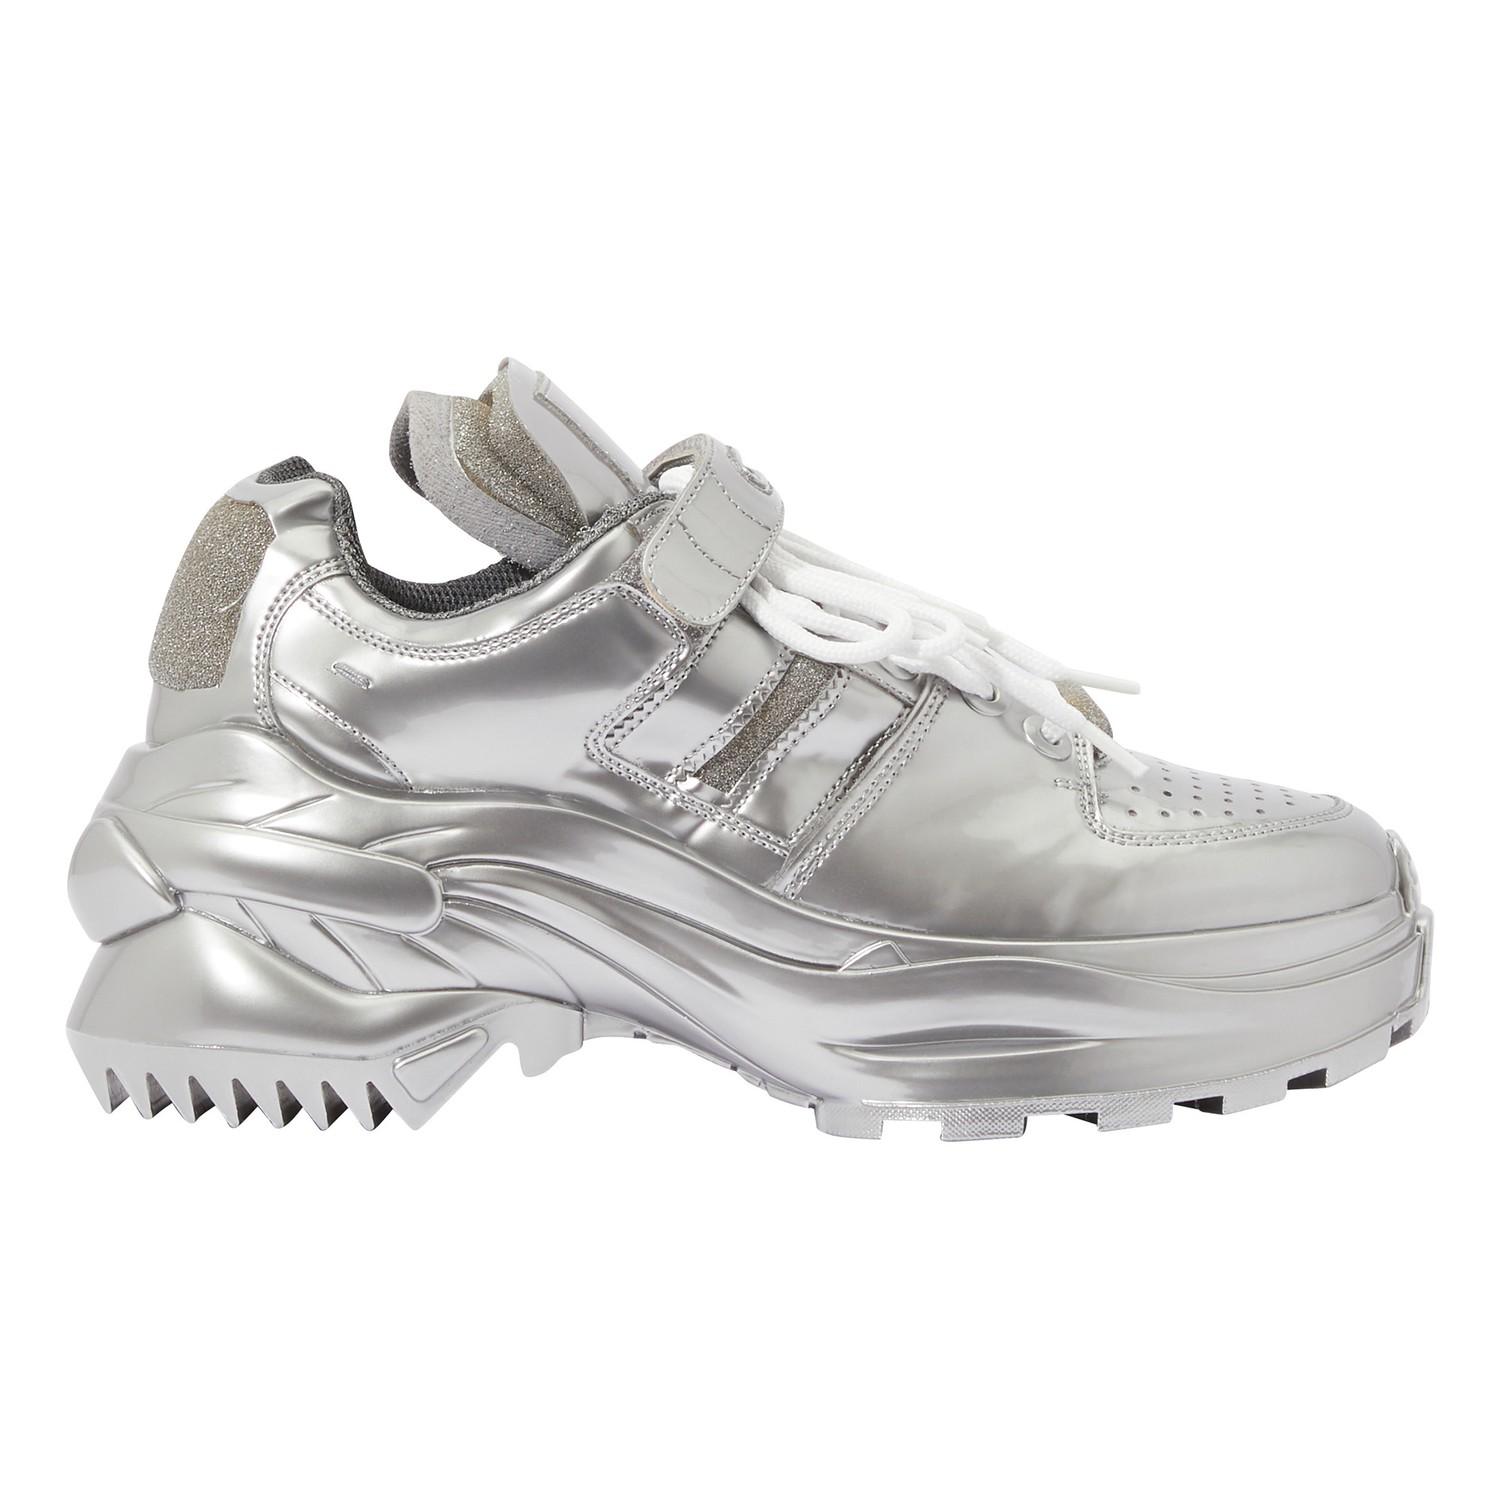 Maison Margiela Leather Retro Fit Sneakers in Silver (Metallic) - Save ...